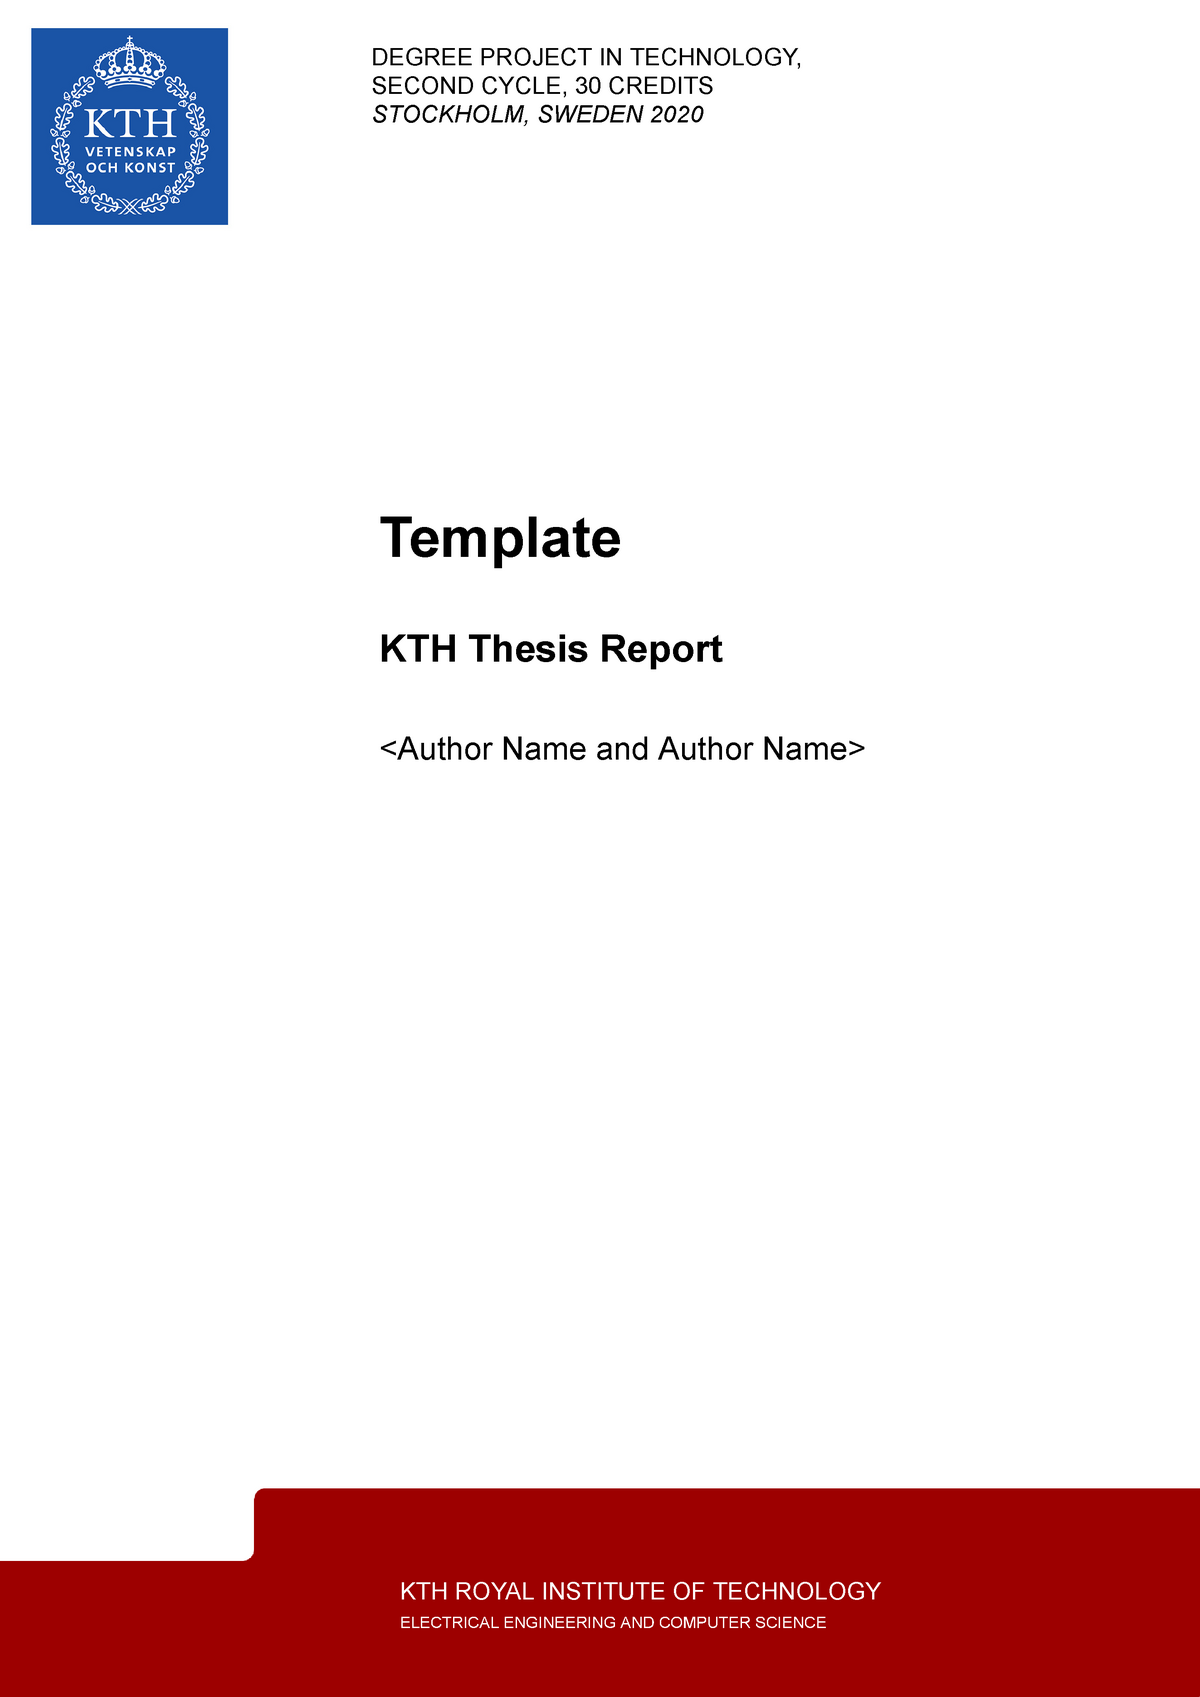 kth thesis template